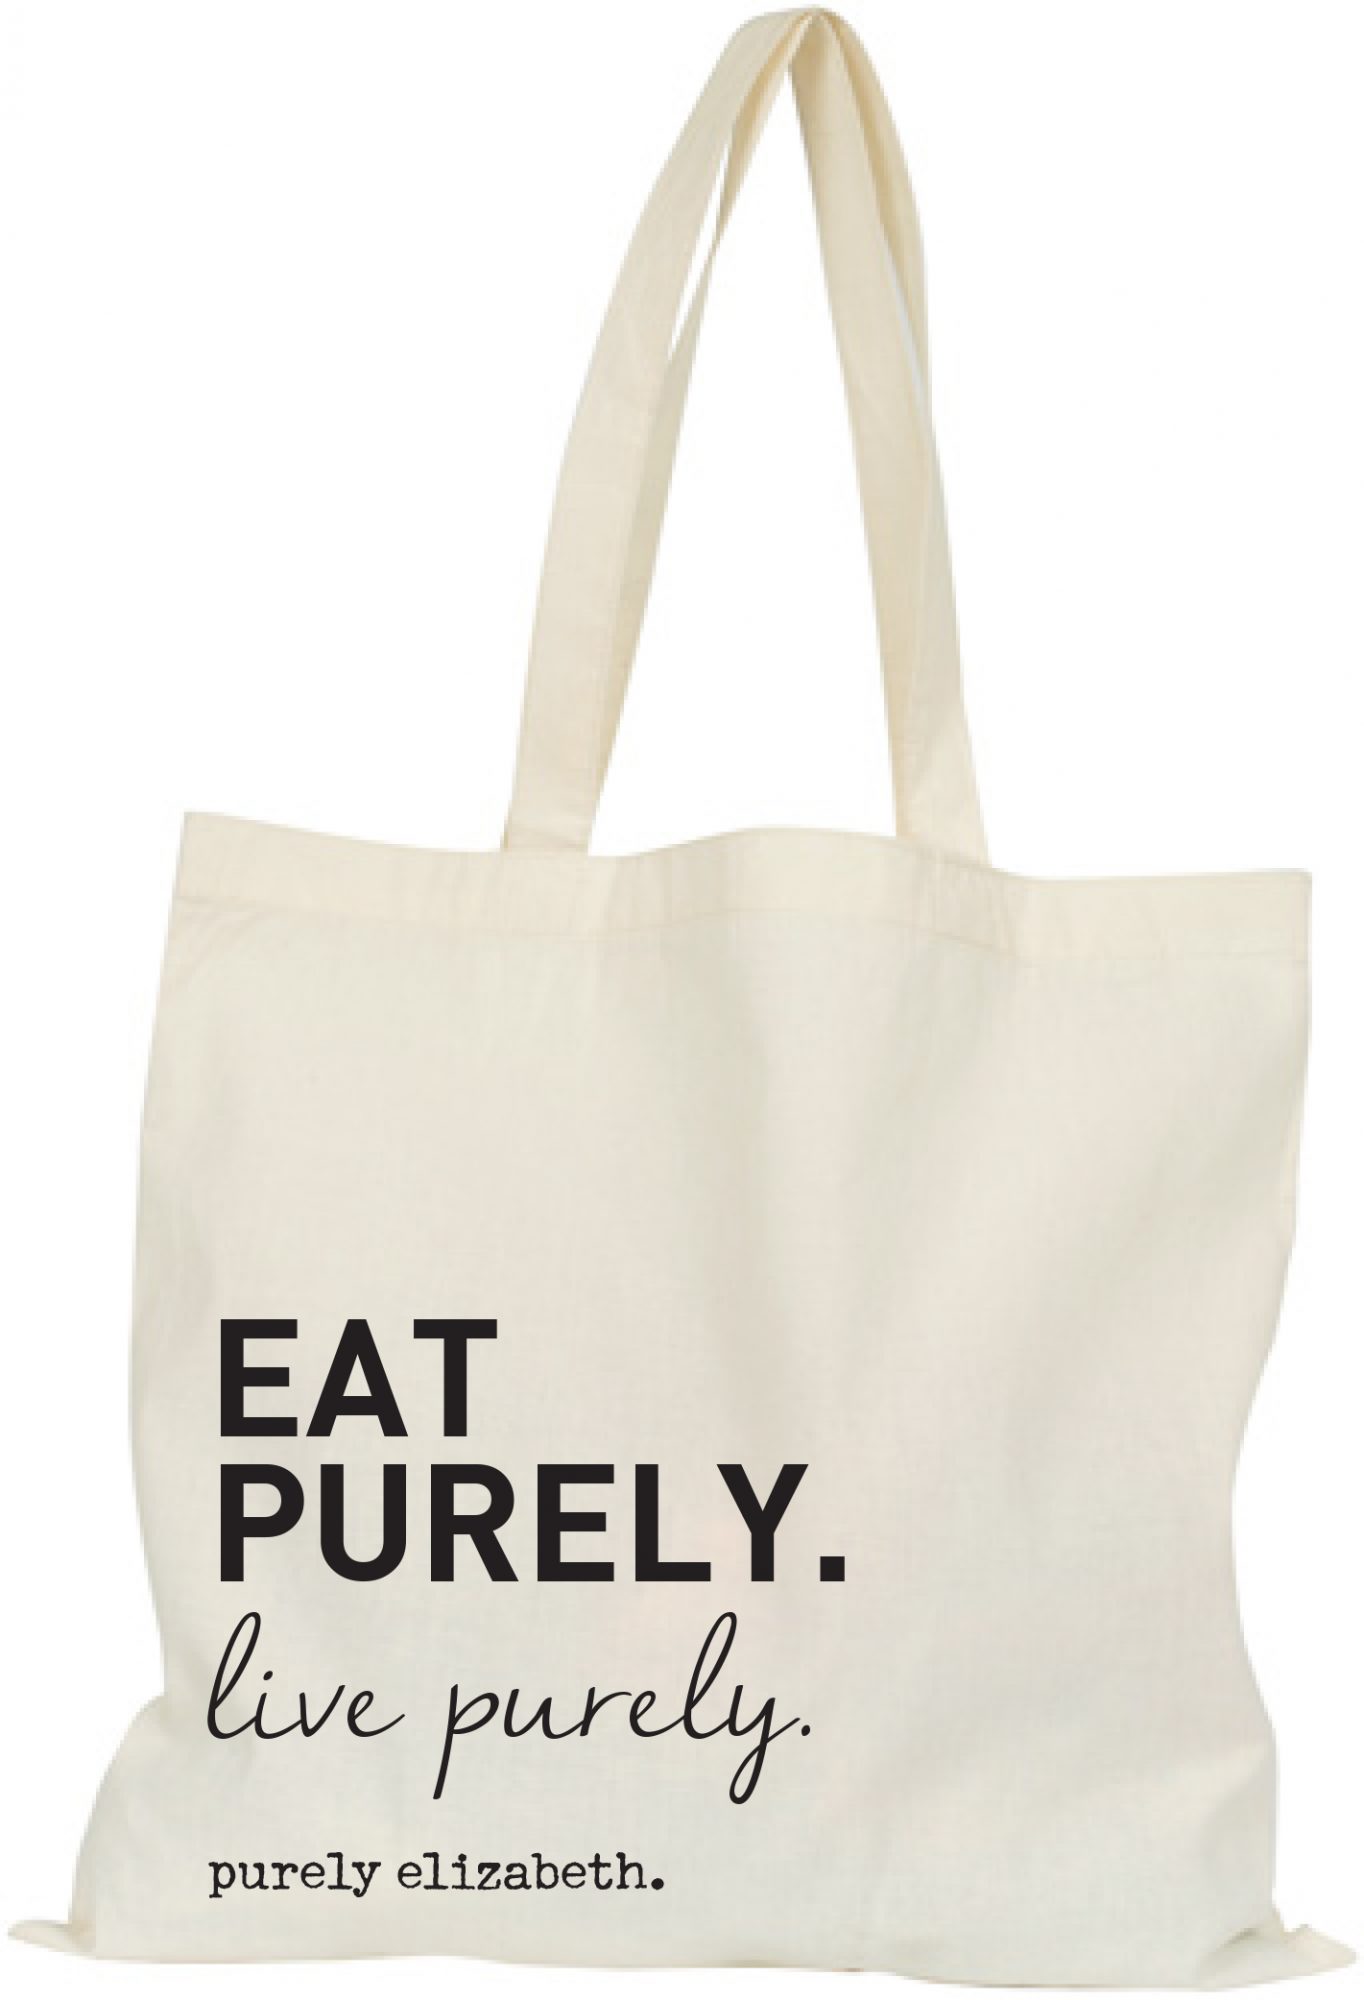 Eat-Purely-Tote-Final-2015-1.jpg